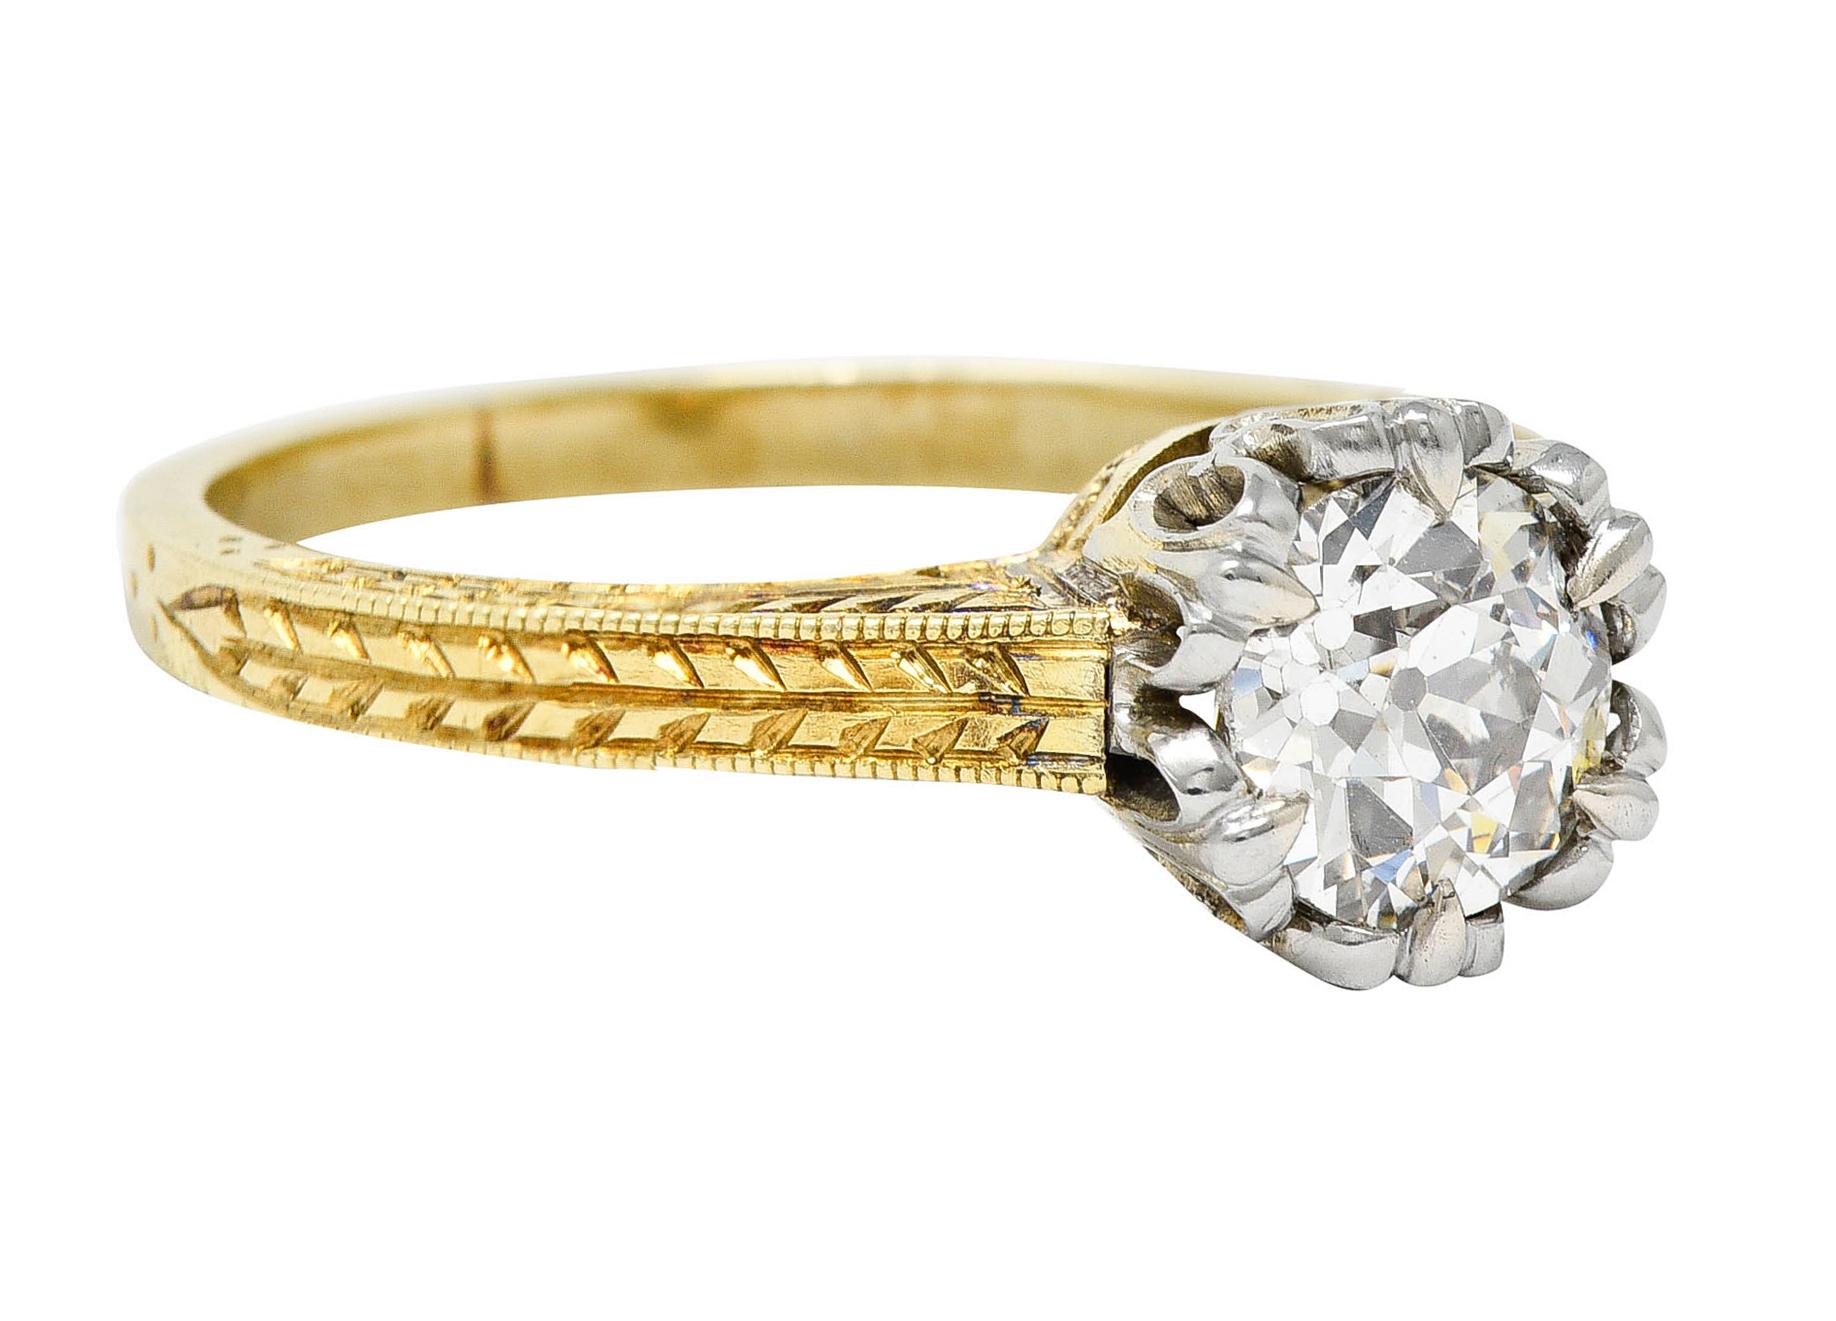 Featuring an old European cut diamond weighing approximately 1.00 carat - J color with VS2 clarity

Set in a platinum head with a stylized and looping fleur-de-lis motif

With a substantial yellow gold shank hand engraved with a wheat motif

Stamped